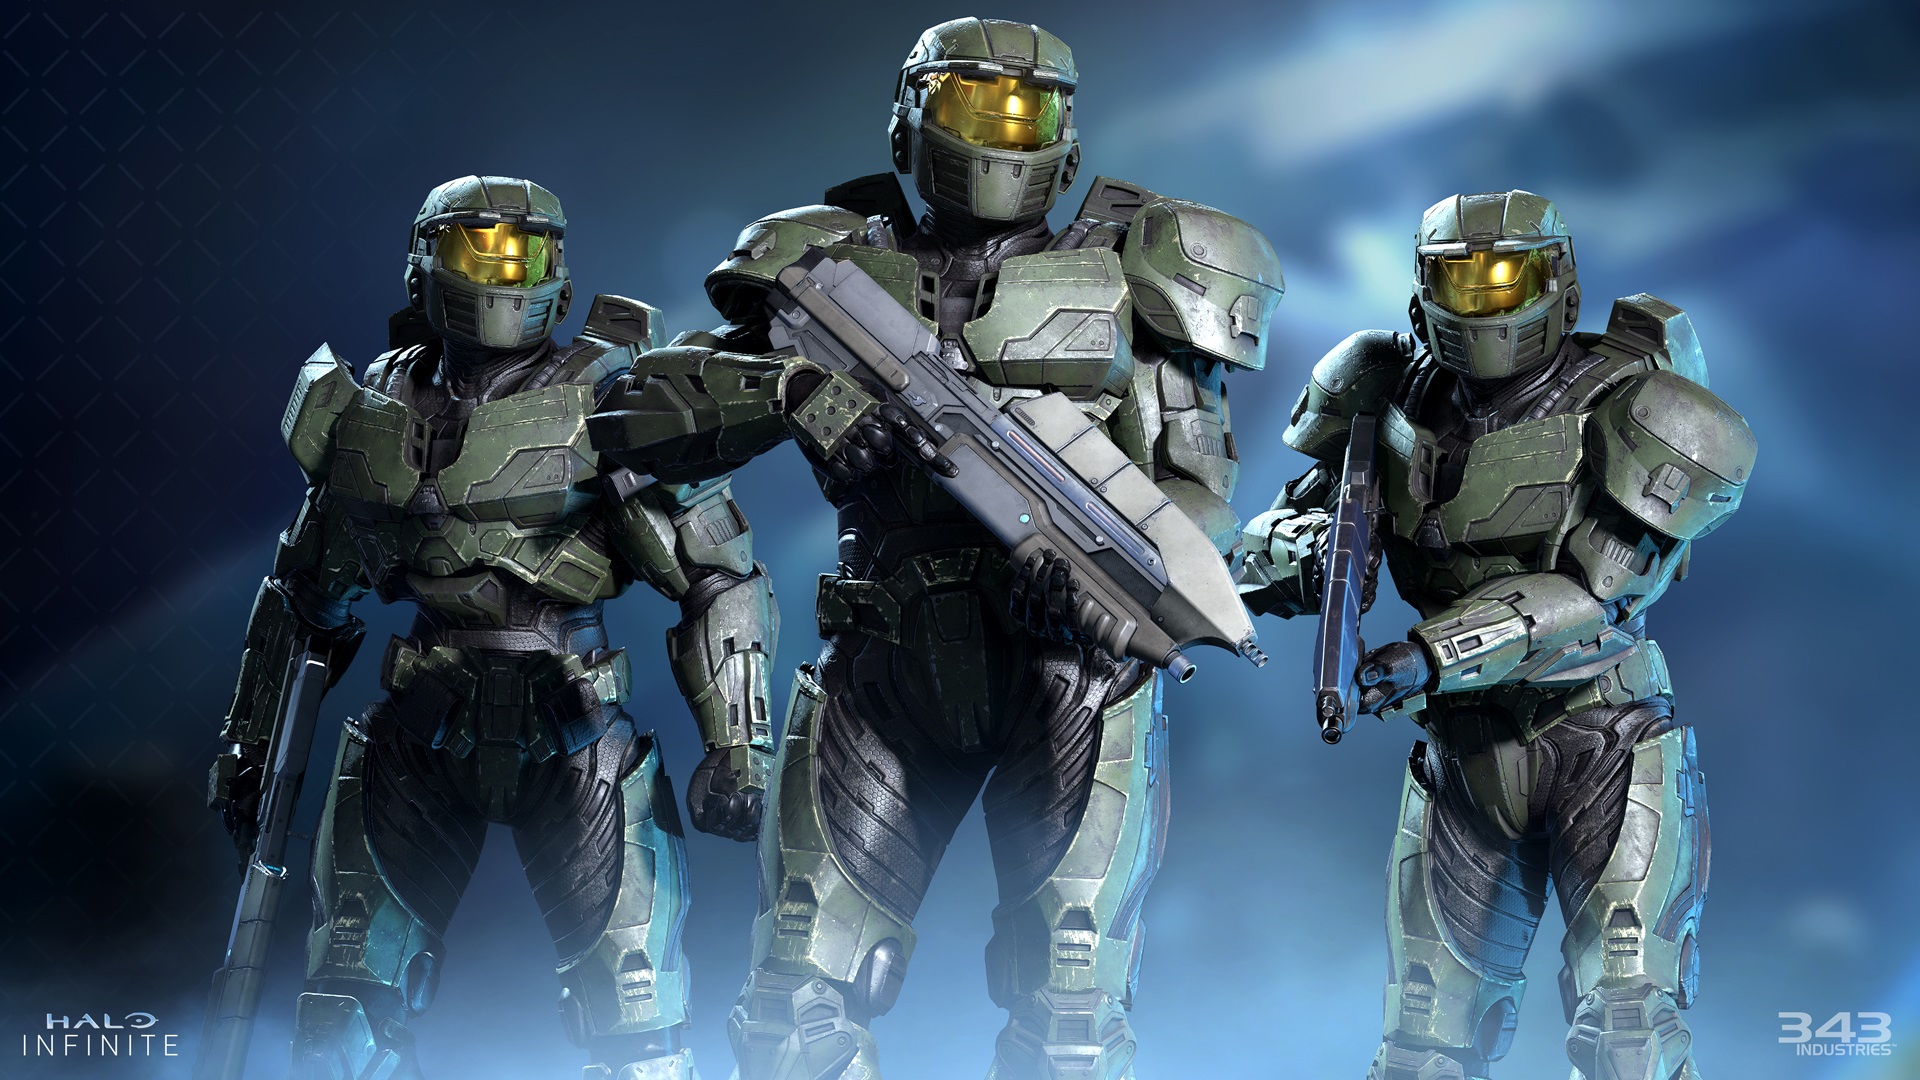 Halo Infinite image of three Spartans clad in Mark IV armor